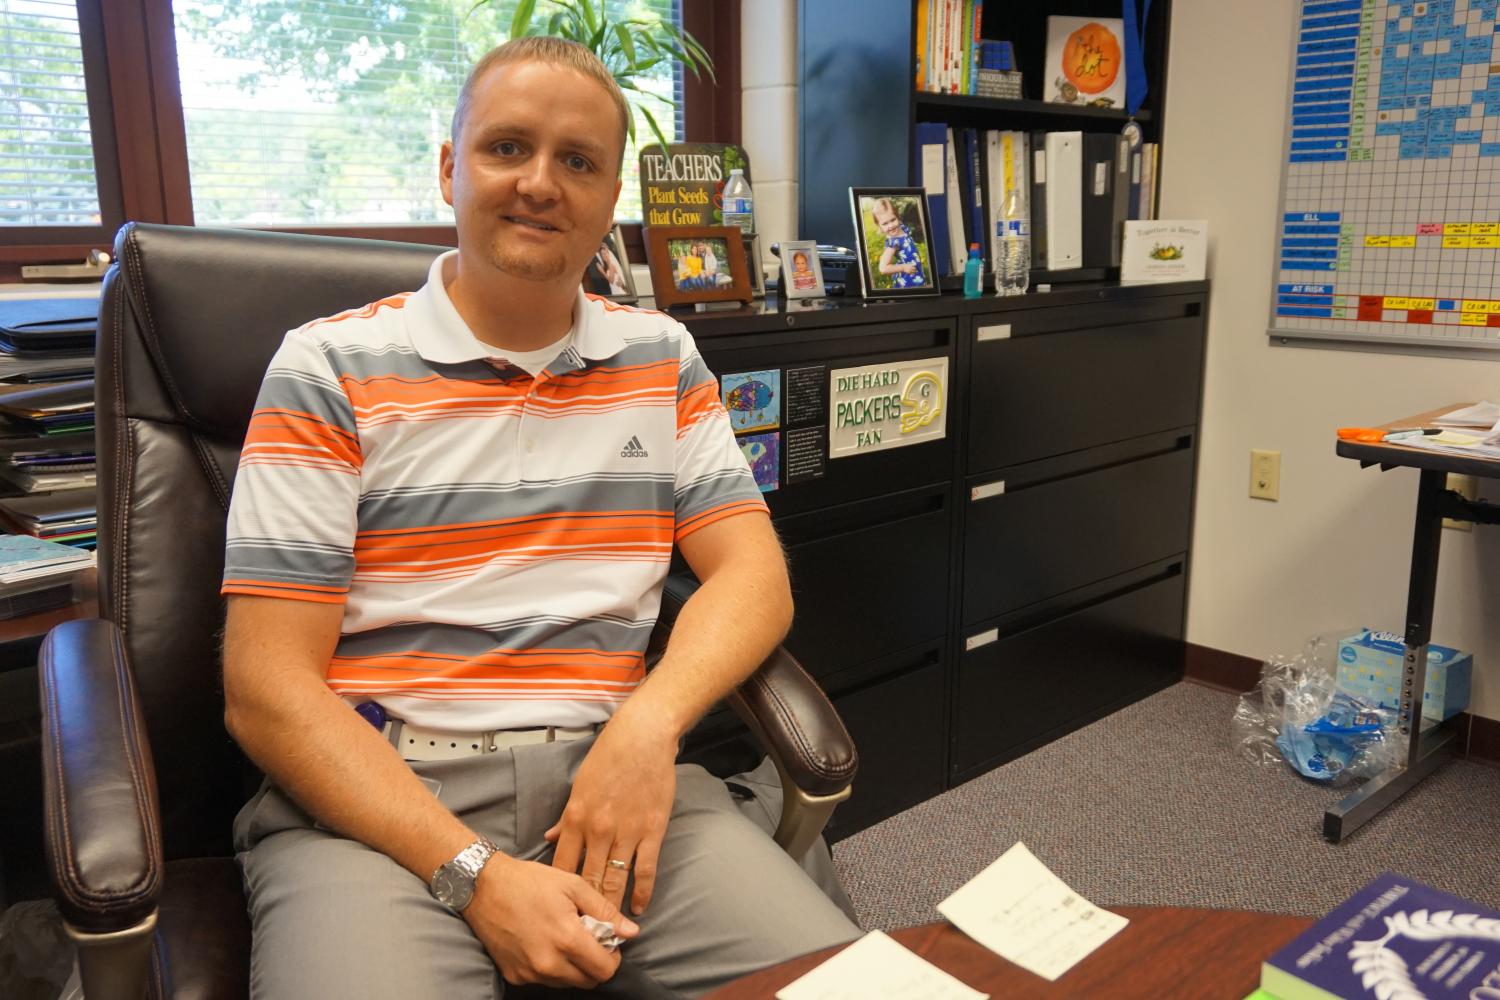 New Assistant Principal brings new perspectives into North